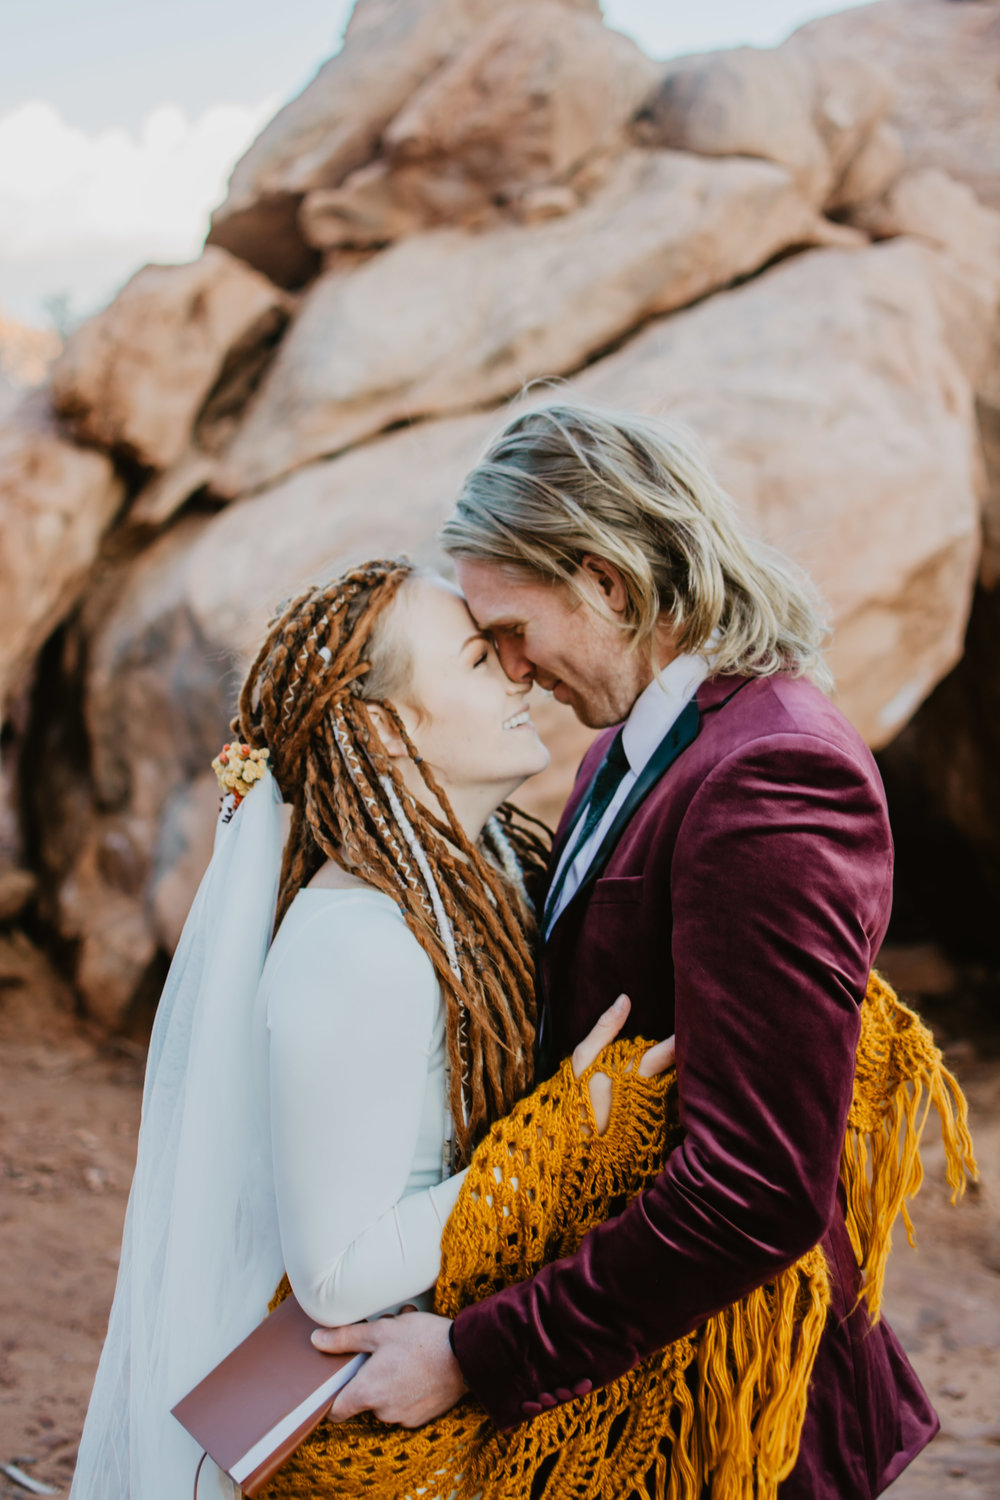 Moab Utah adventure elopement with bride and groom embracing each other and smiling as their noses touch while standing in front of red rocks Jocilyn Bennett Photography | How to Plan an Elopement | Why Elope | Reasons to Elope | Destination Wedding Photographer | Utah Wedding Photographer | Adventure Photographer | Destination Elopement Photographer | Traveling Photographer | Arches National Park | Arches National Park Elopement | Southern Utah Elopement | Boho Bride | Bride with dreads |